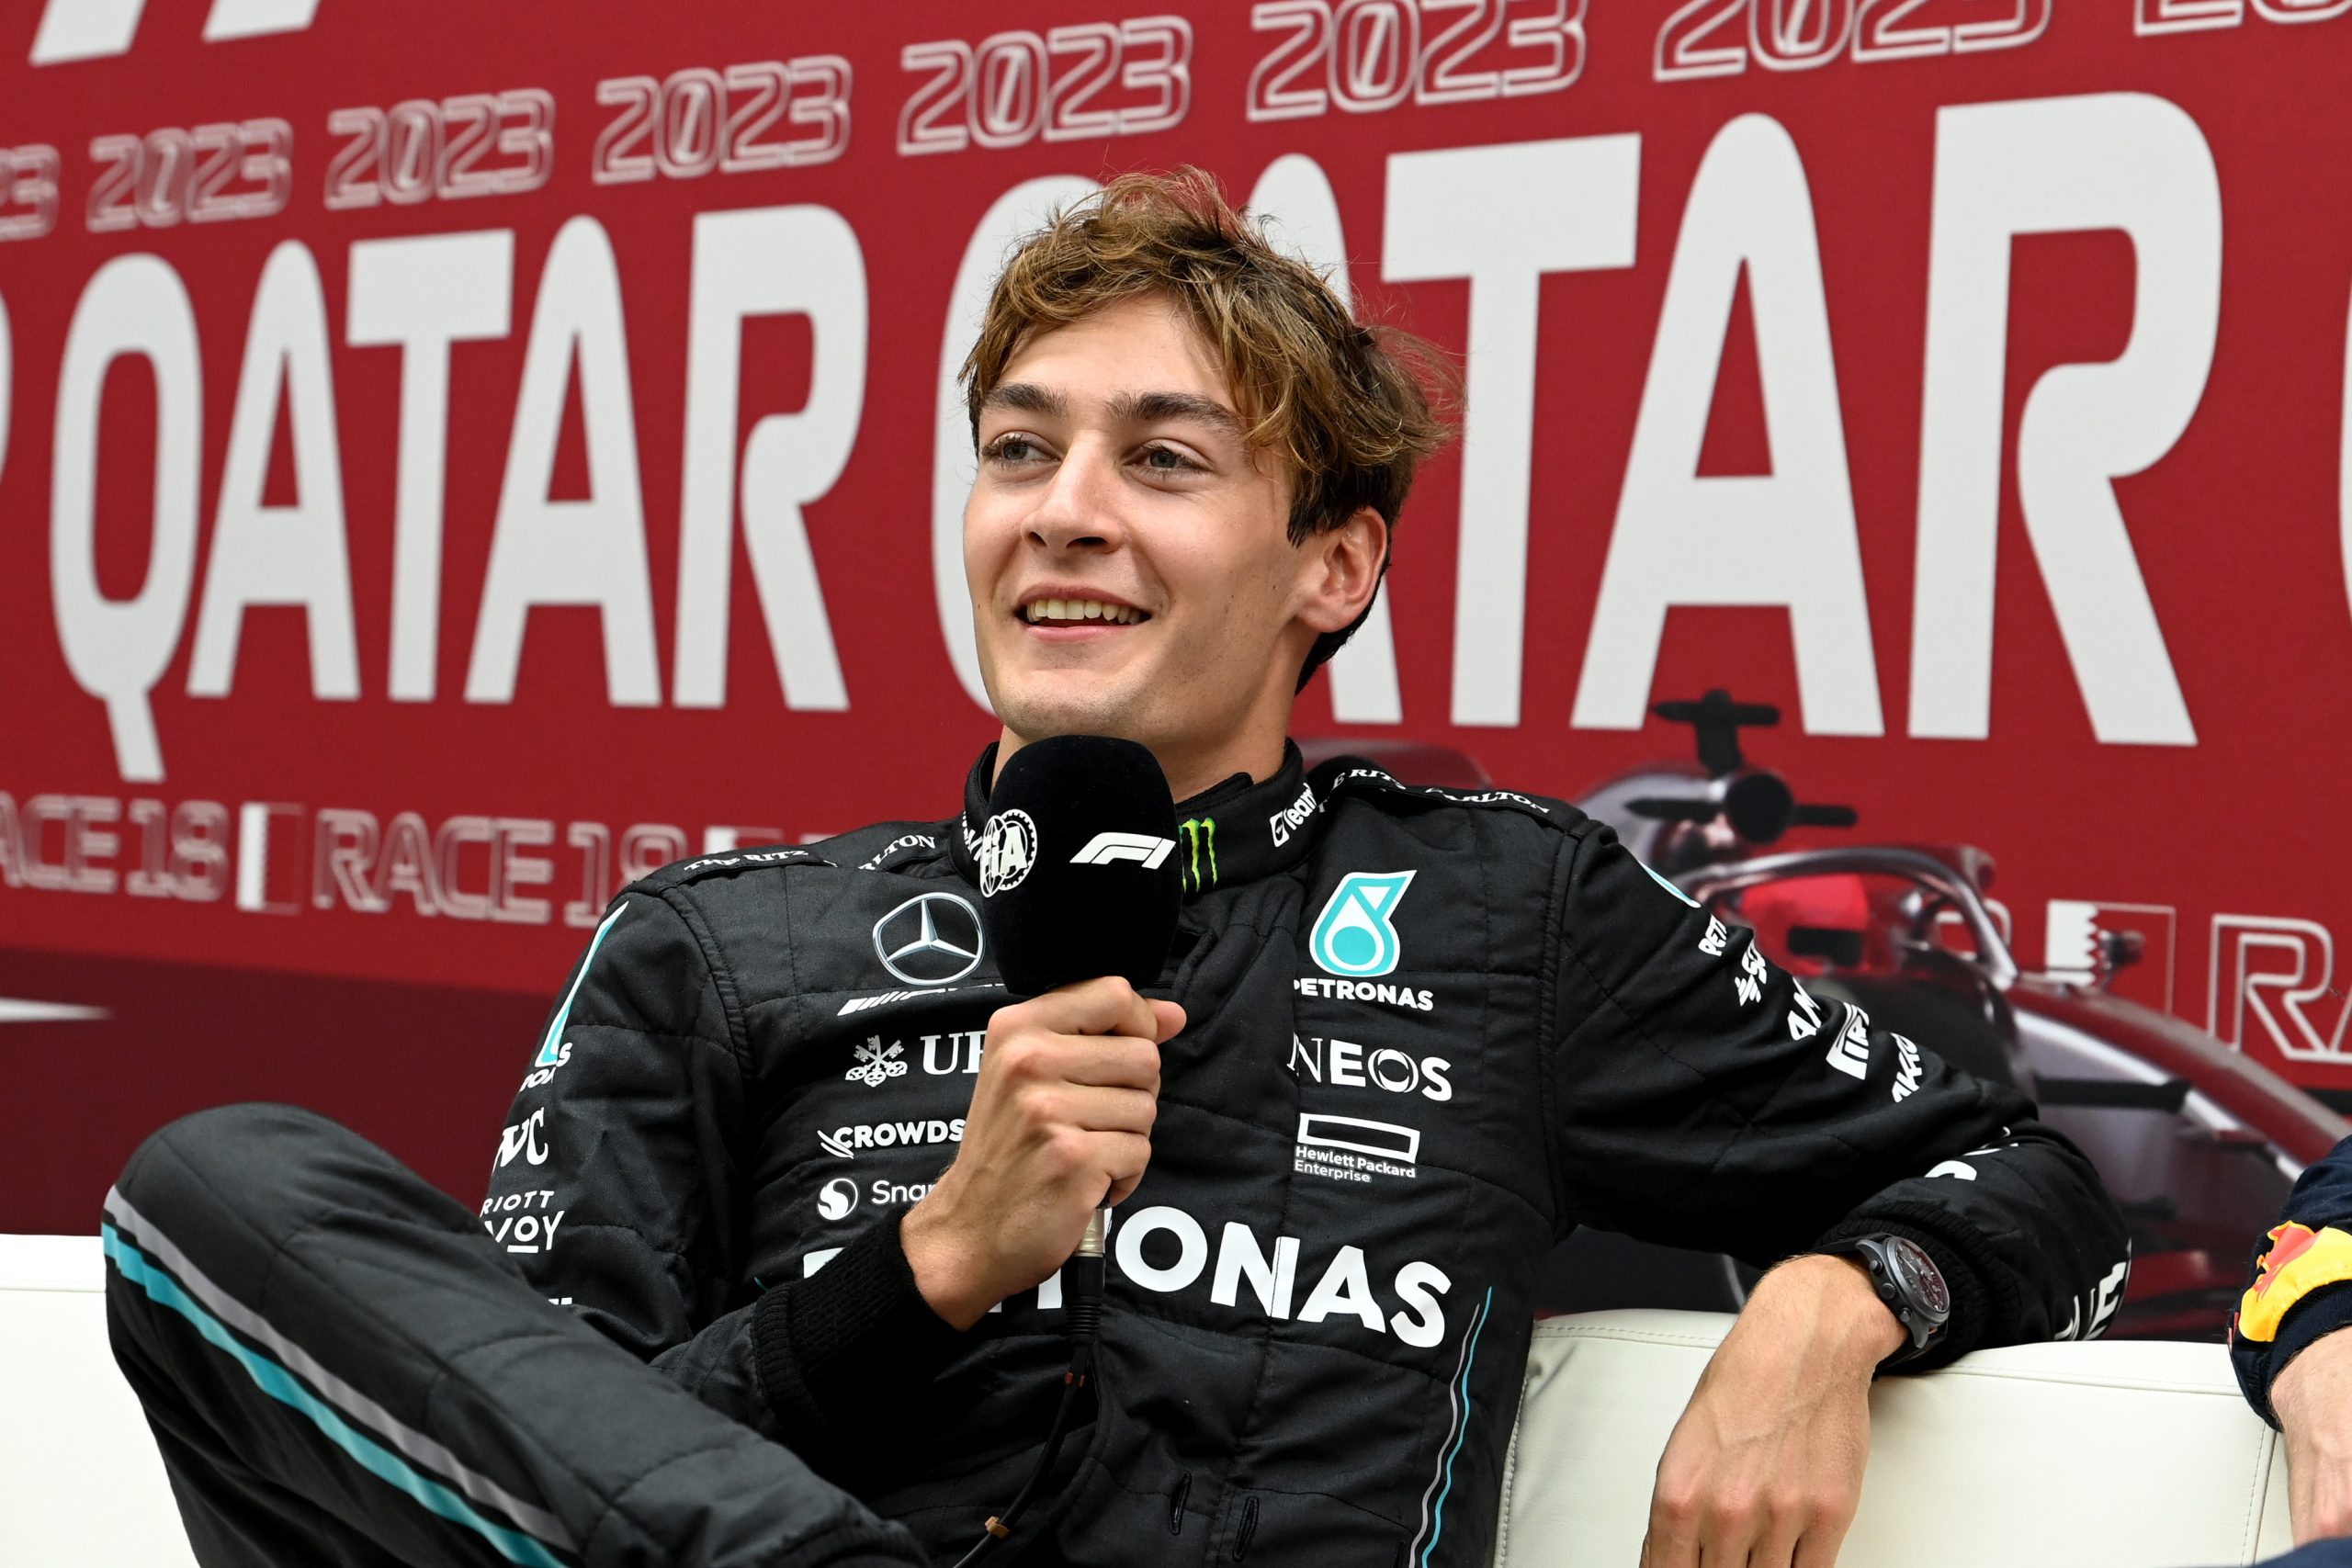 George Russell talking to the press at the Qatar Grand Prix, 2023